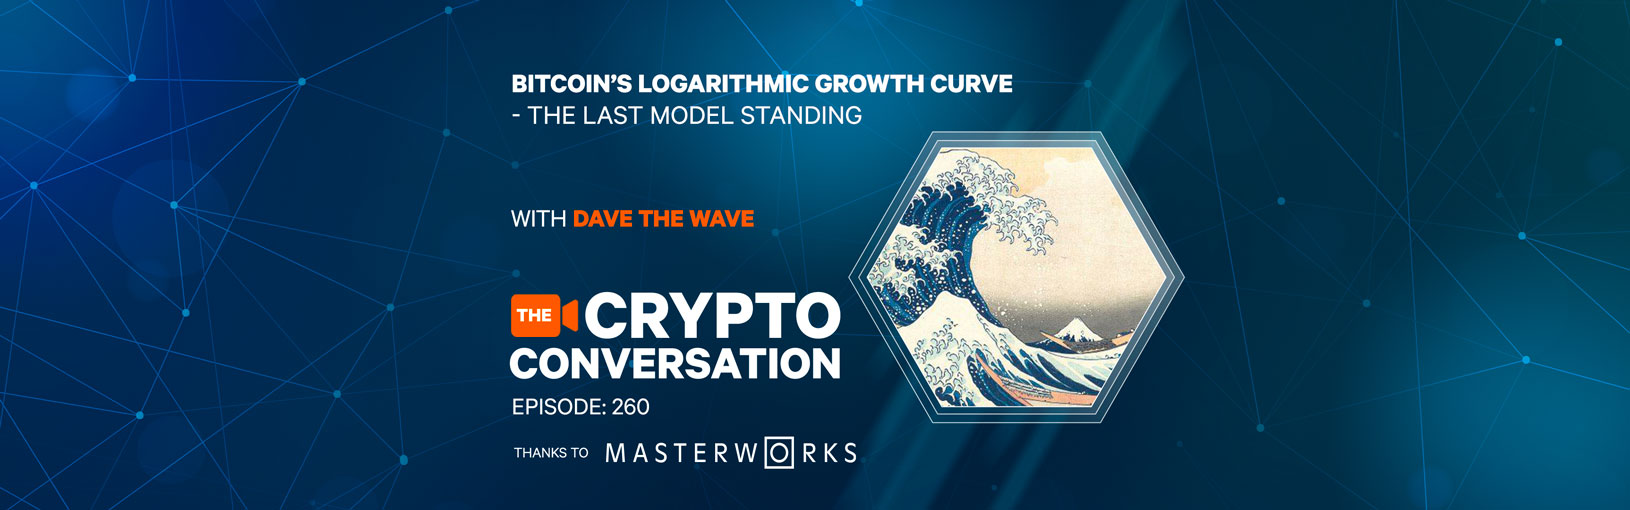 Bitcoin’s Logarithmic Growth Curve – last model standing?